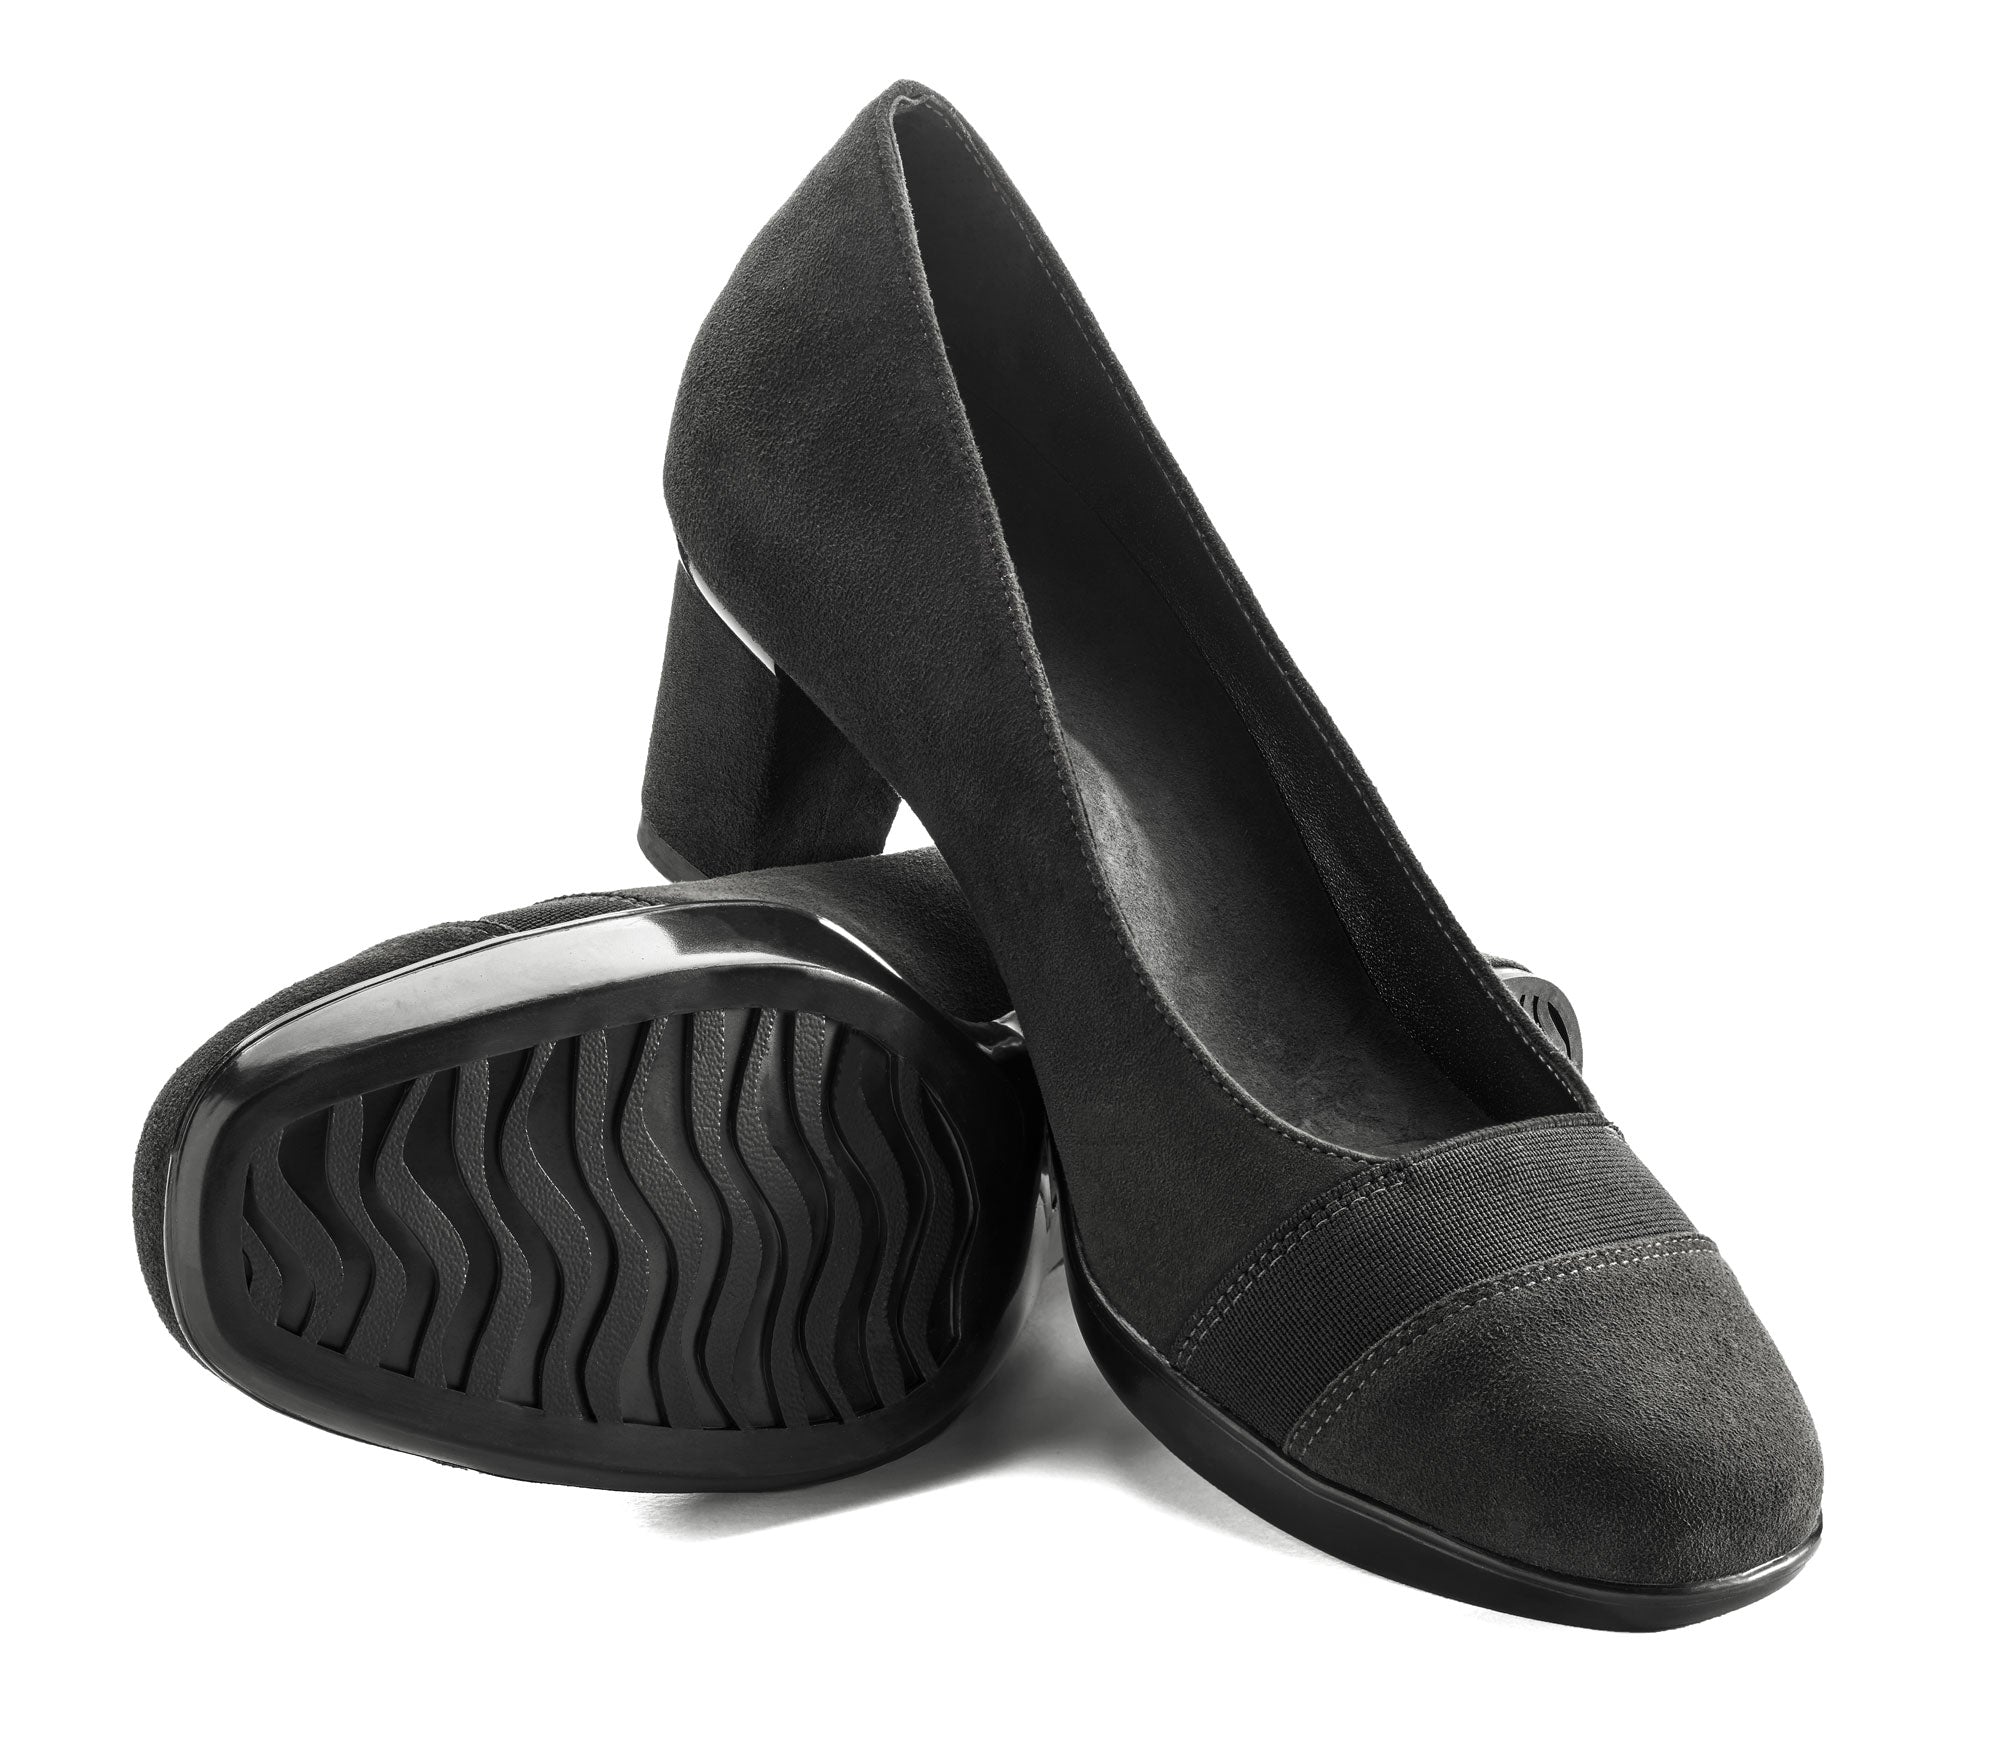 The Divadend Collection - Divadend Footwear